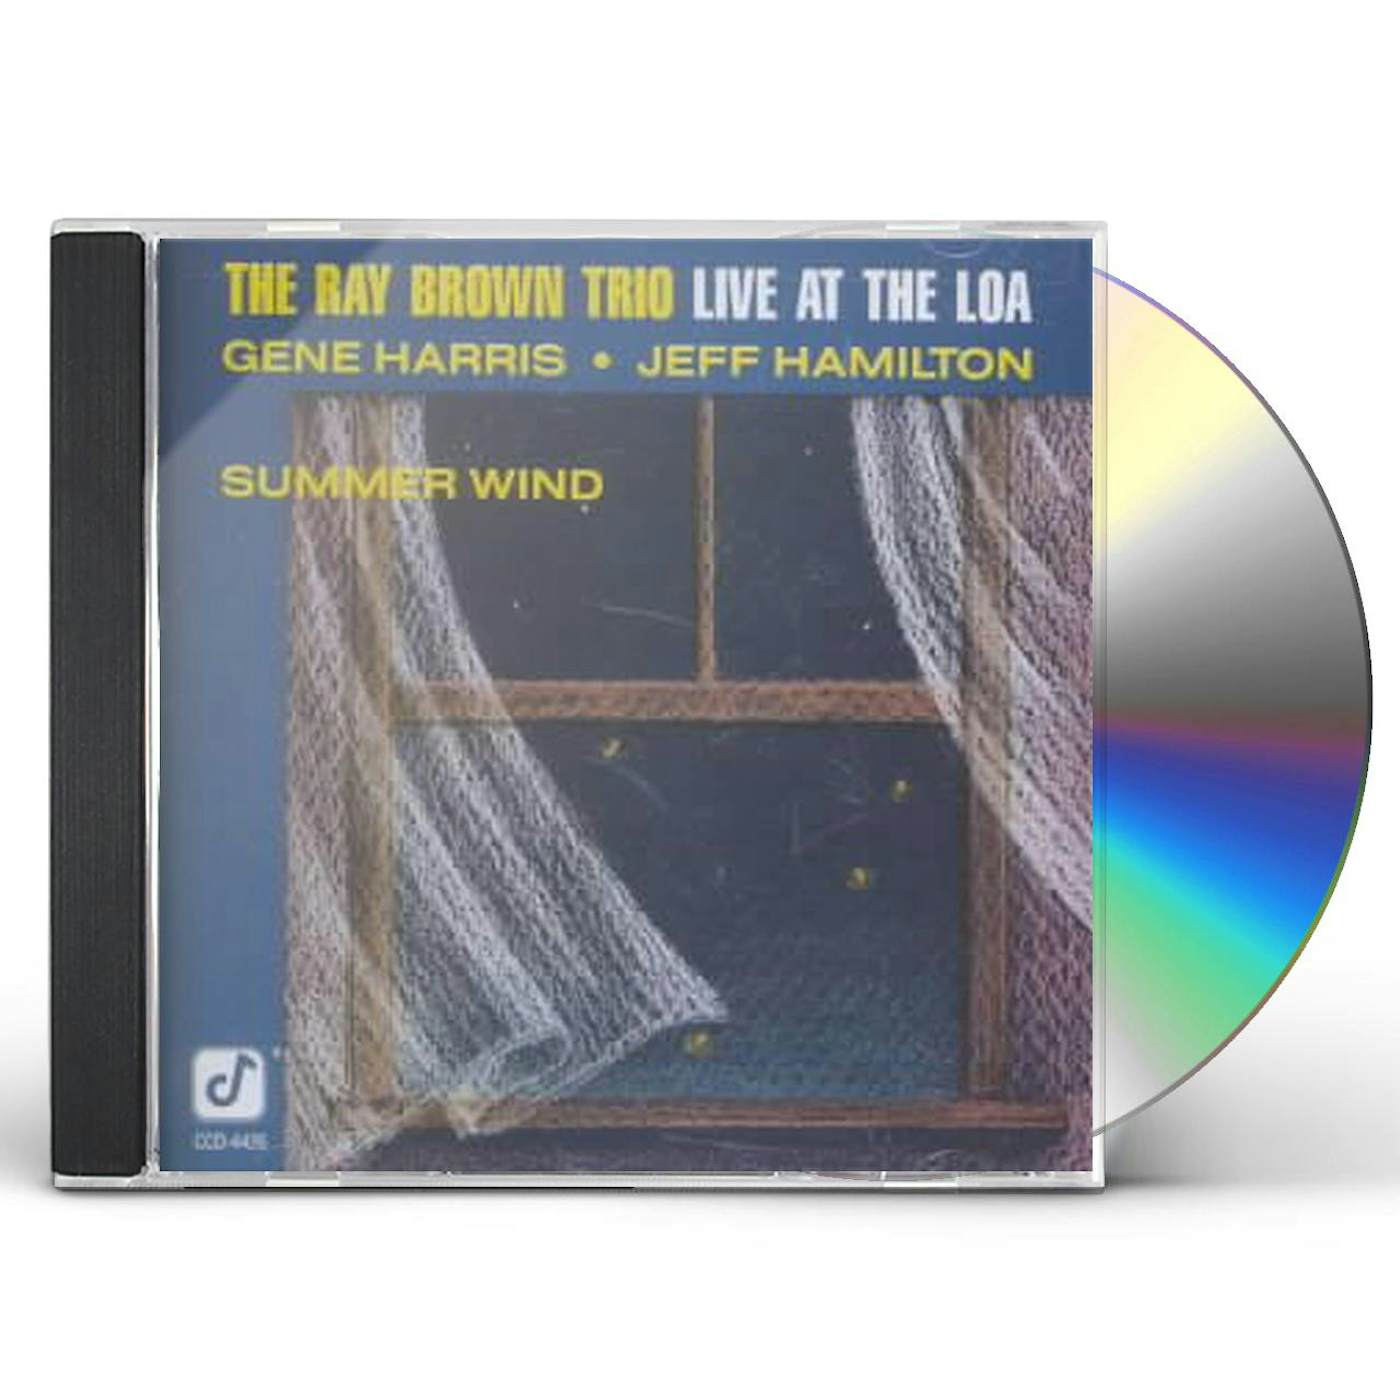 Ray Brown Trio SUMMER WIND CD